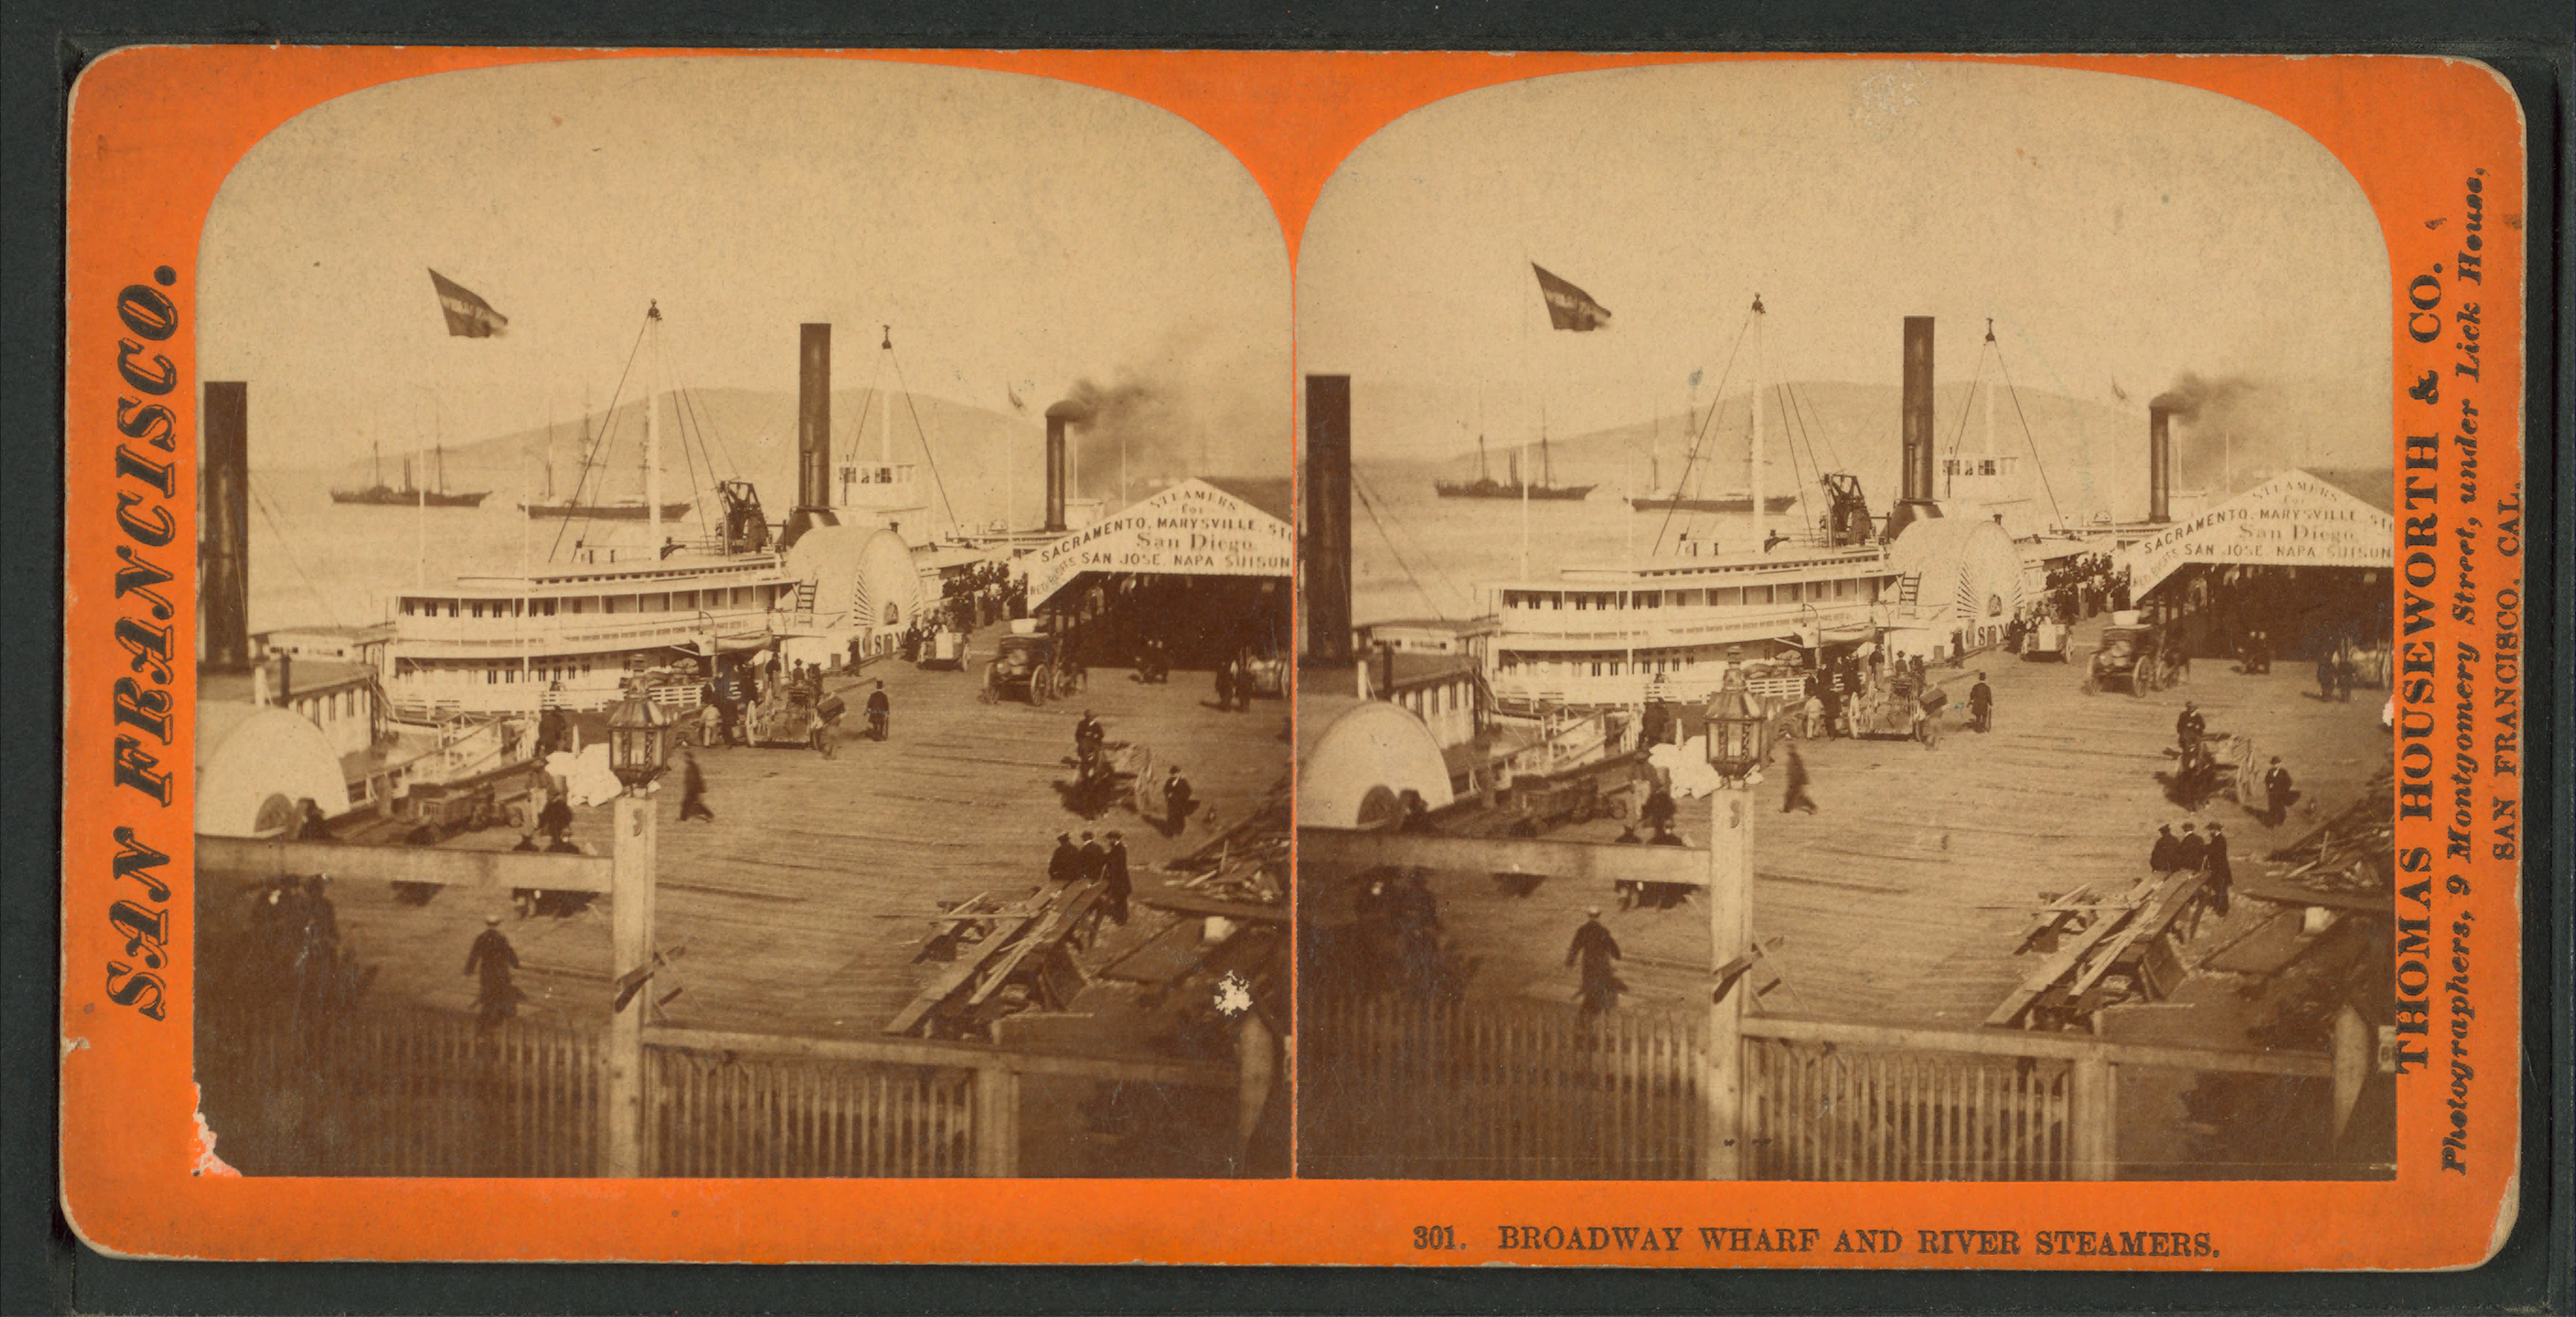 Broadway Wharf and River Steamers, by Thomas Houseworth & Co. 2